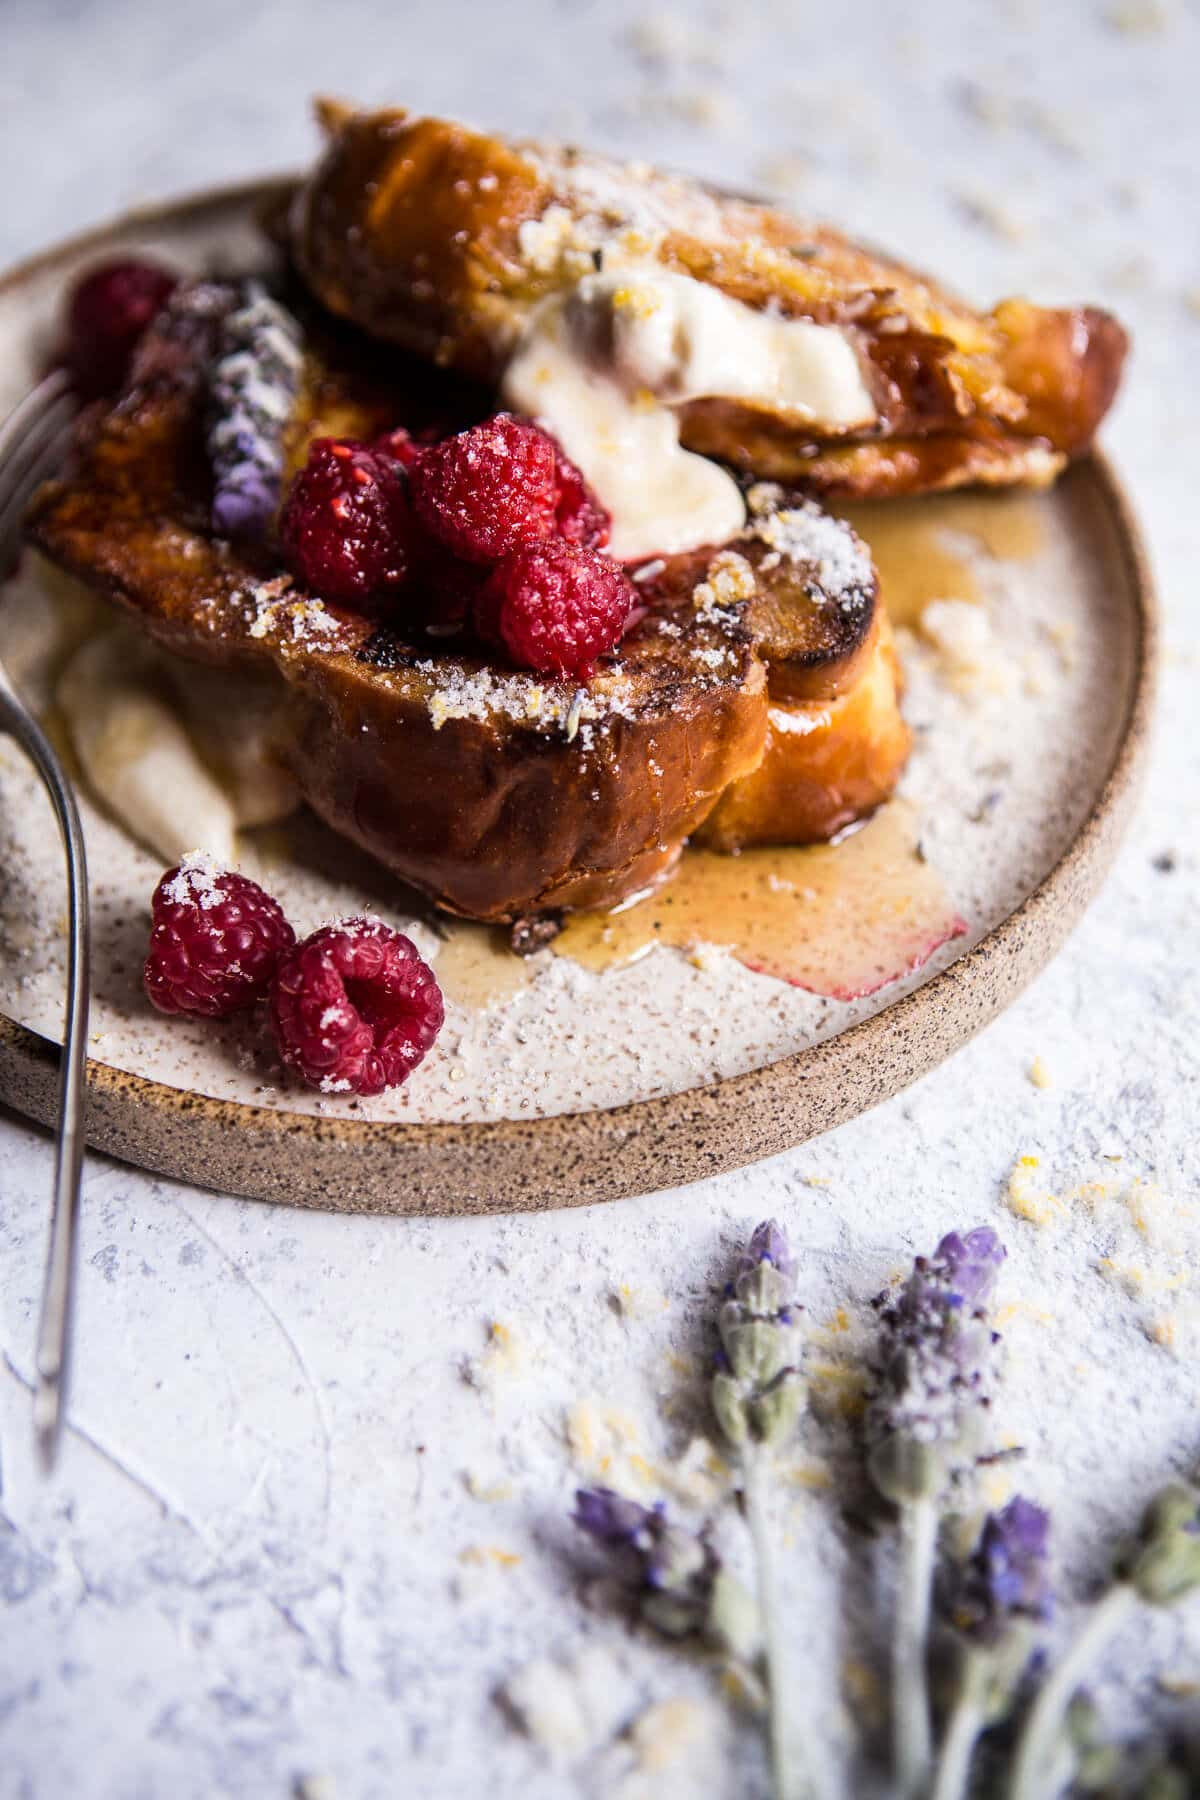 Cream Cheese French Toast
 Whipped Cream Cheese Stuffed French Toast with Raspberries